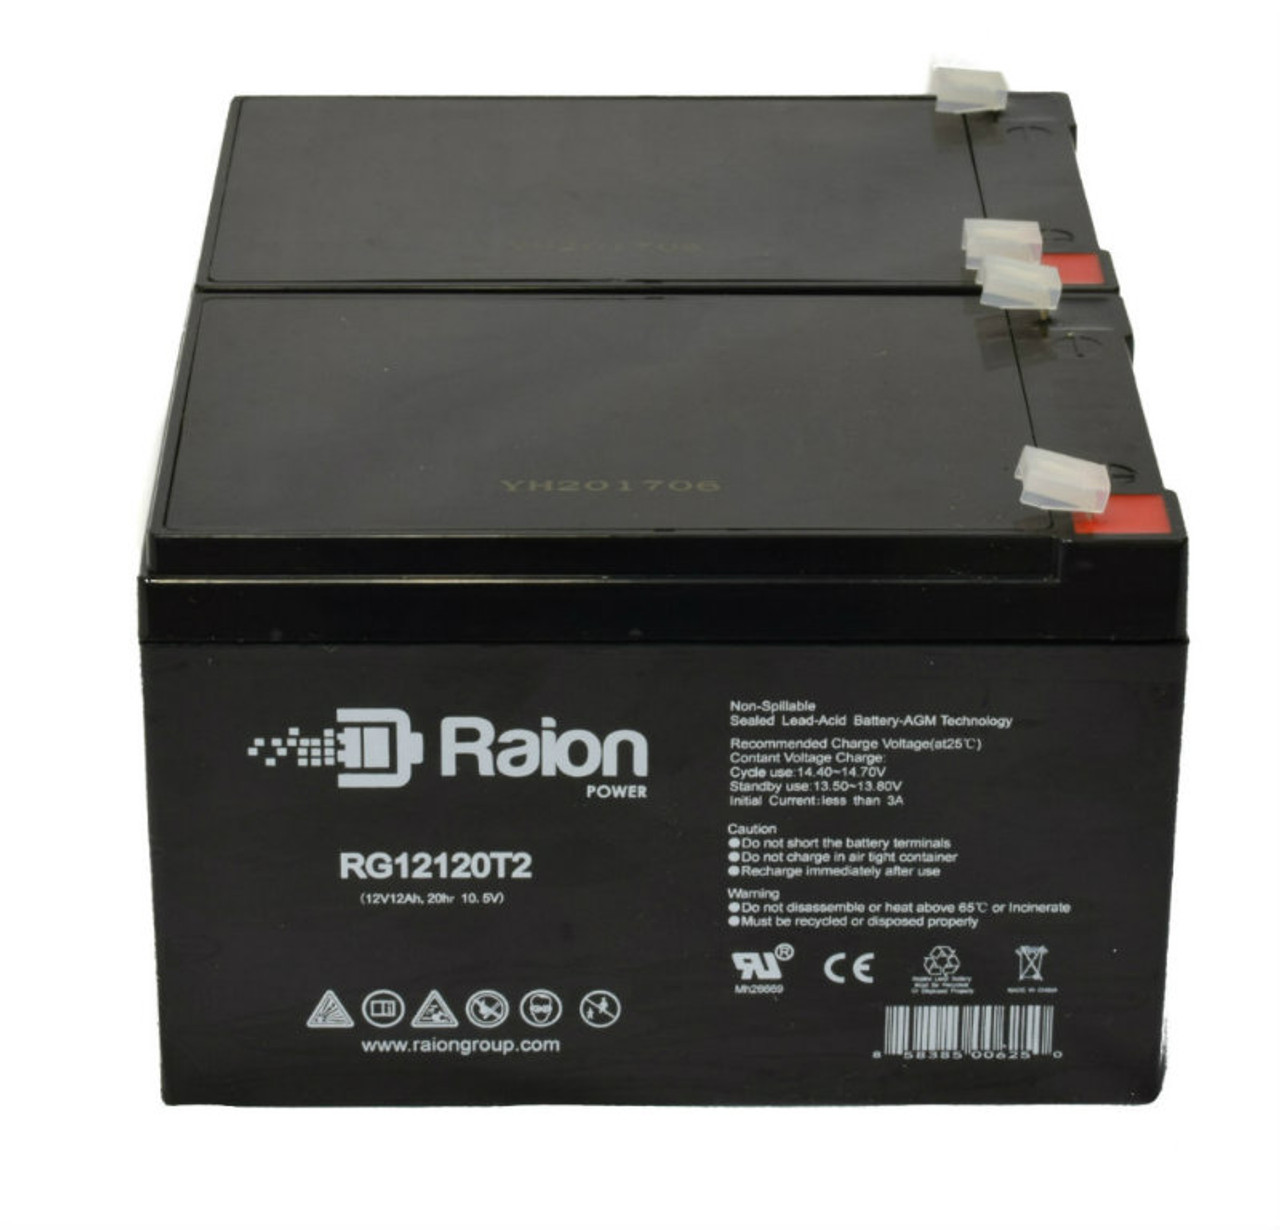 Raion Power RG12120T2 Replacement Fire Alarm Control Panel Battery for Altronix MAXIM77E - 2 Pack